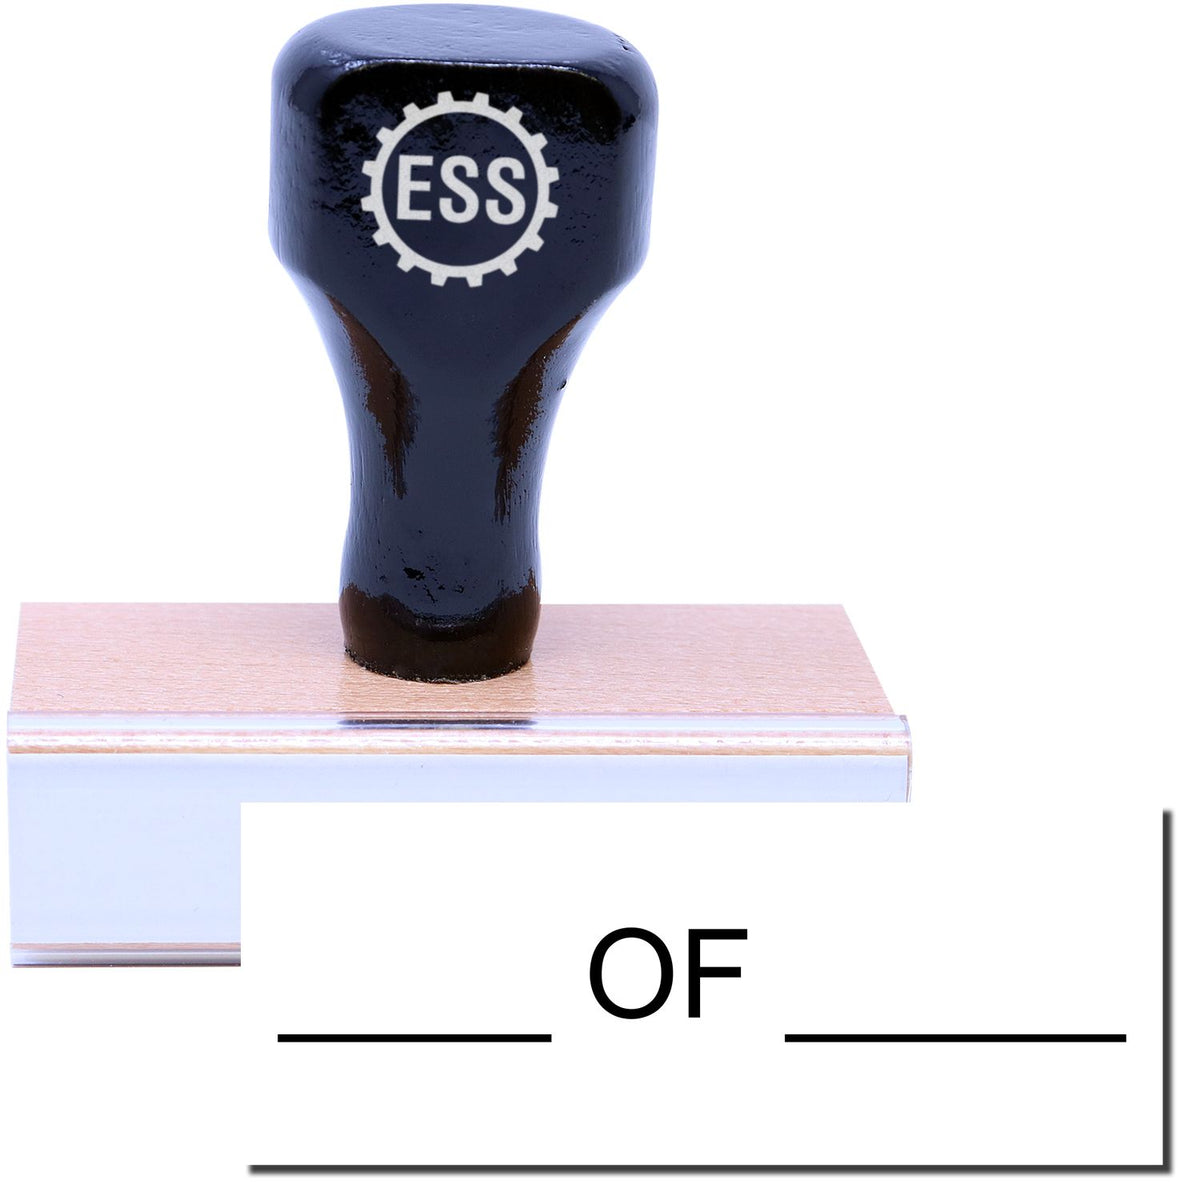 A stock office rubber stamp with a stamped image showing how the text &quot;___ OF ___&quot; in a large font is displayed after stamping.